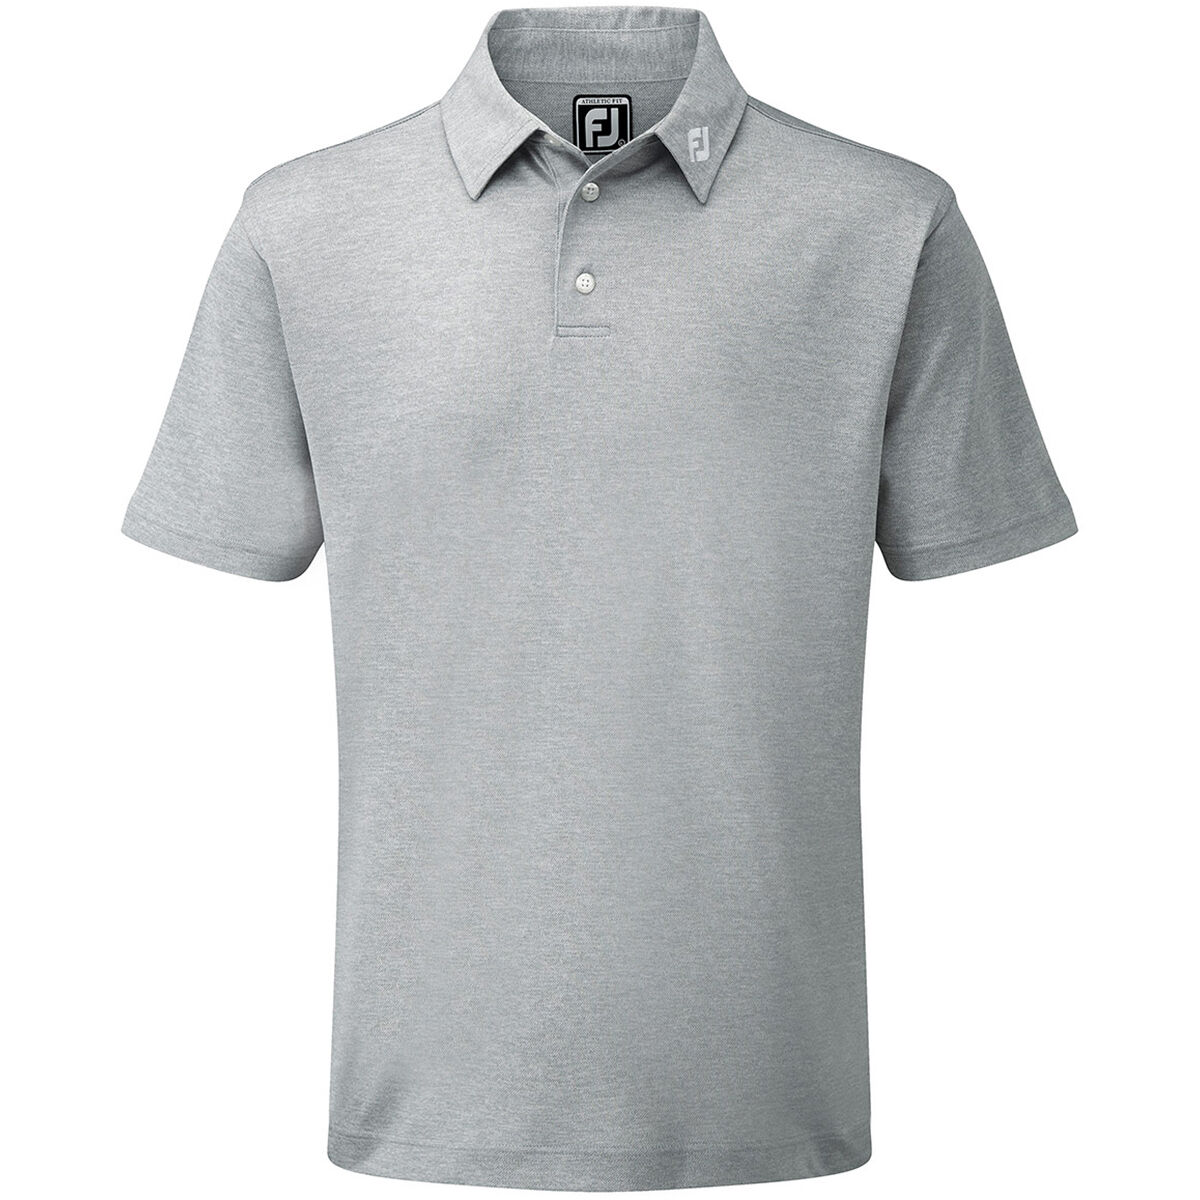 FootJoy Men’s Stretch Pique Solid Colour Golf Polo Shirt, Mens, Grey/heather, Large | American Golf